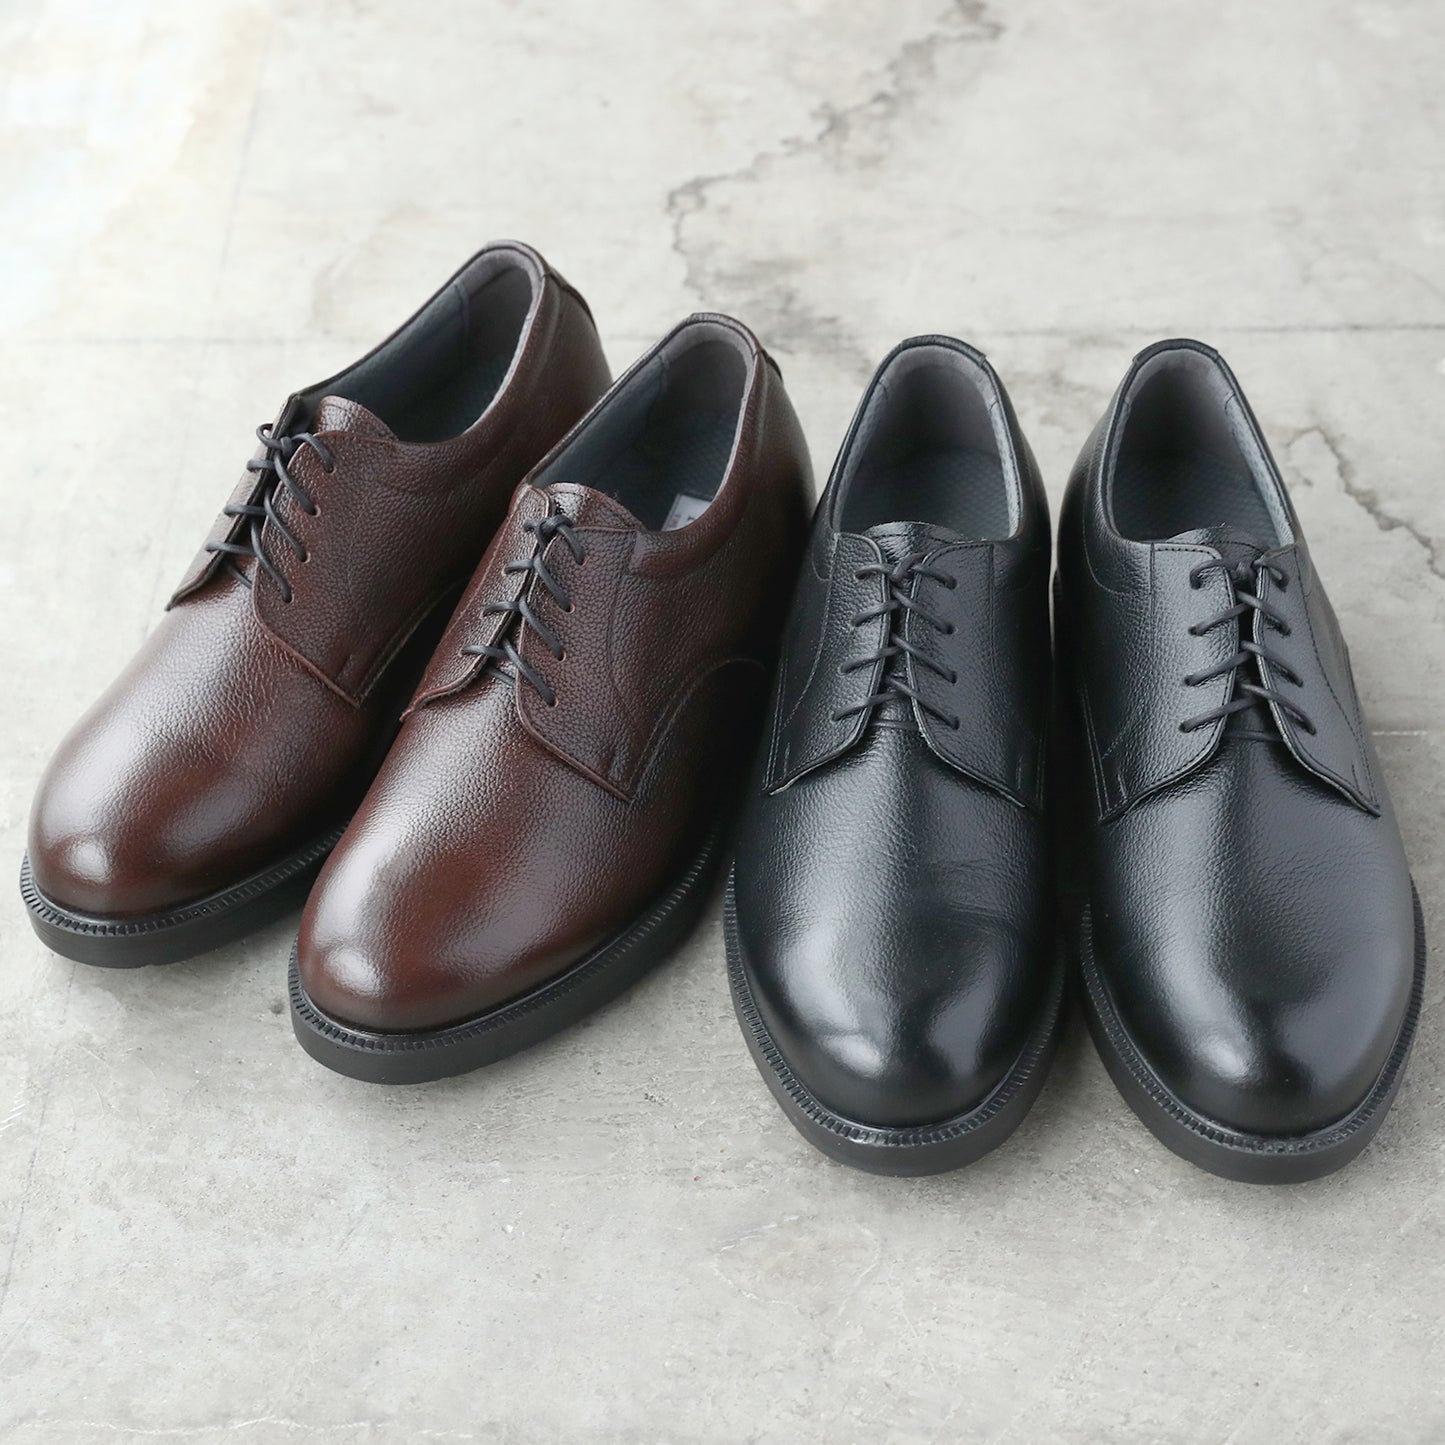 Men's Elevator Shoes Height Increasing 2.2" Taller Derby Plain Toe Lace Up Wide Genuine Leather No. 911